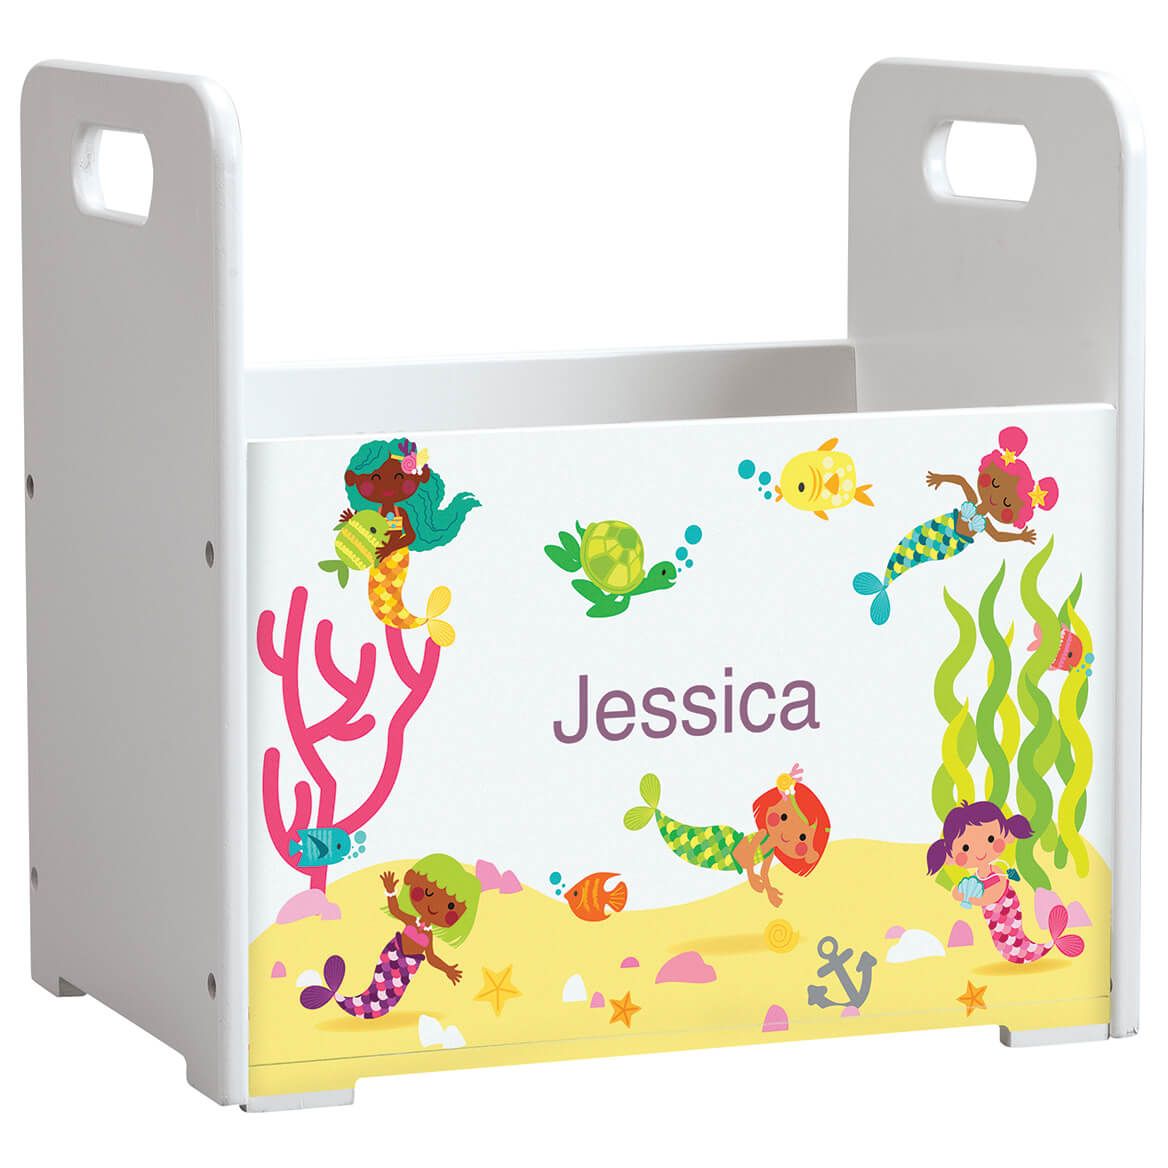 Personalized Mermaids Book Caddy + '-' + 376514